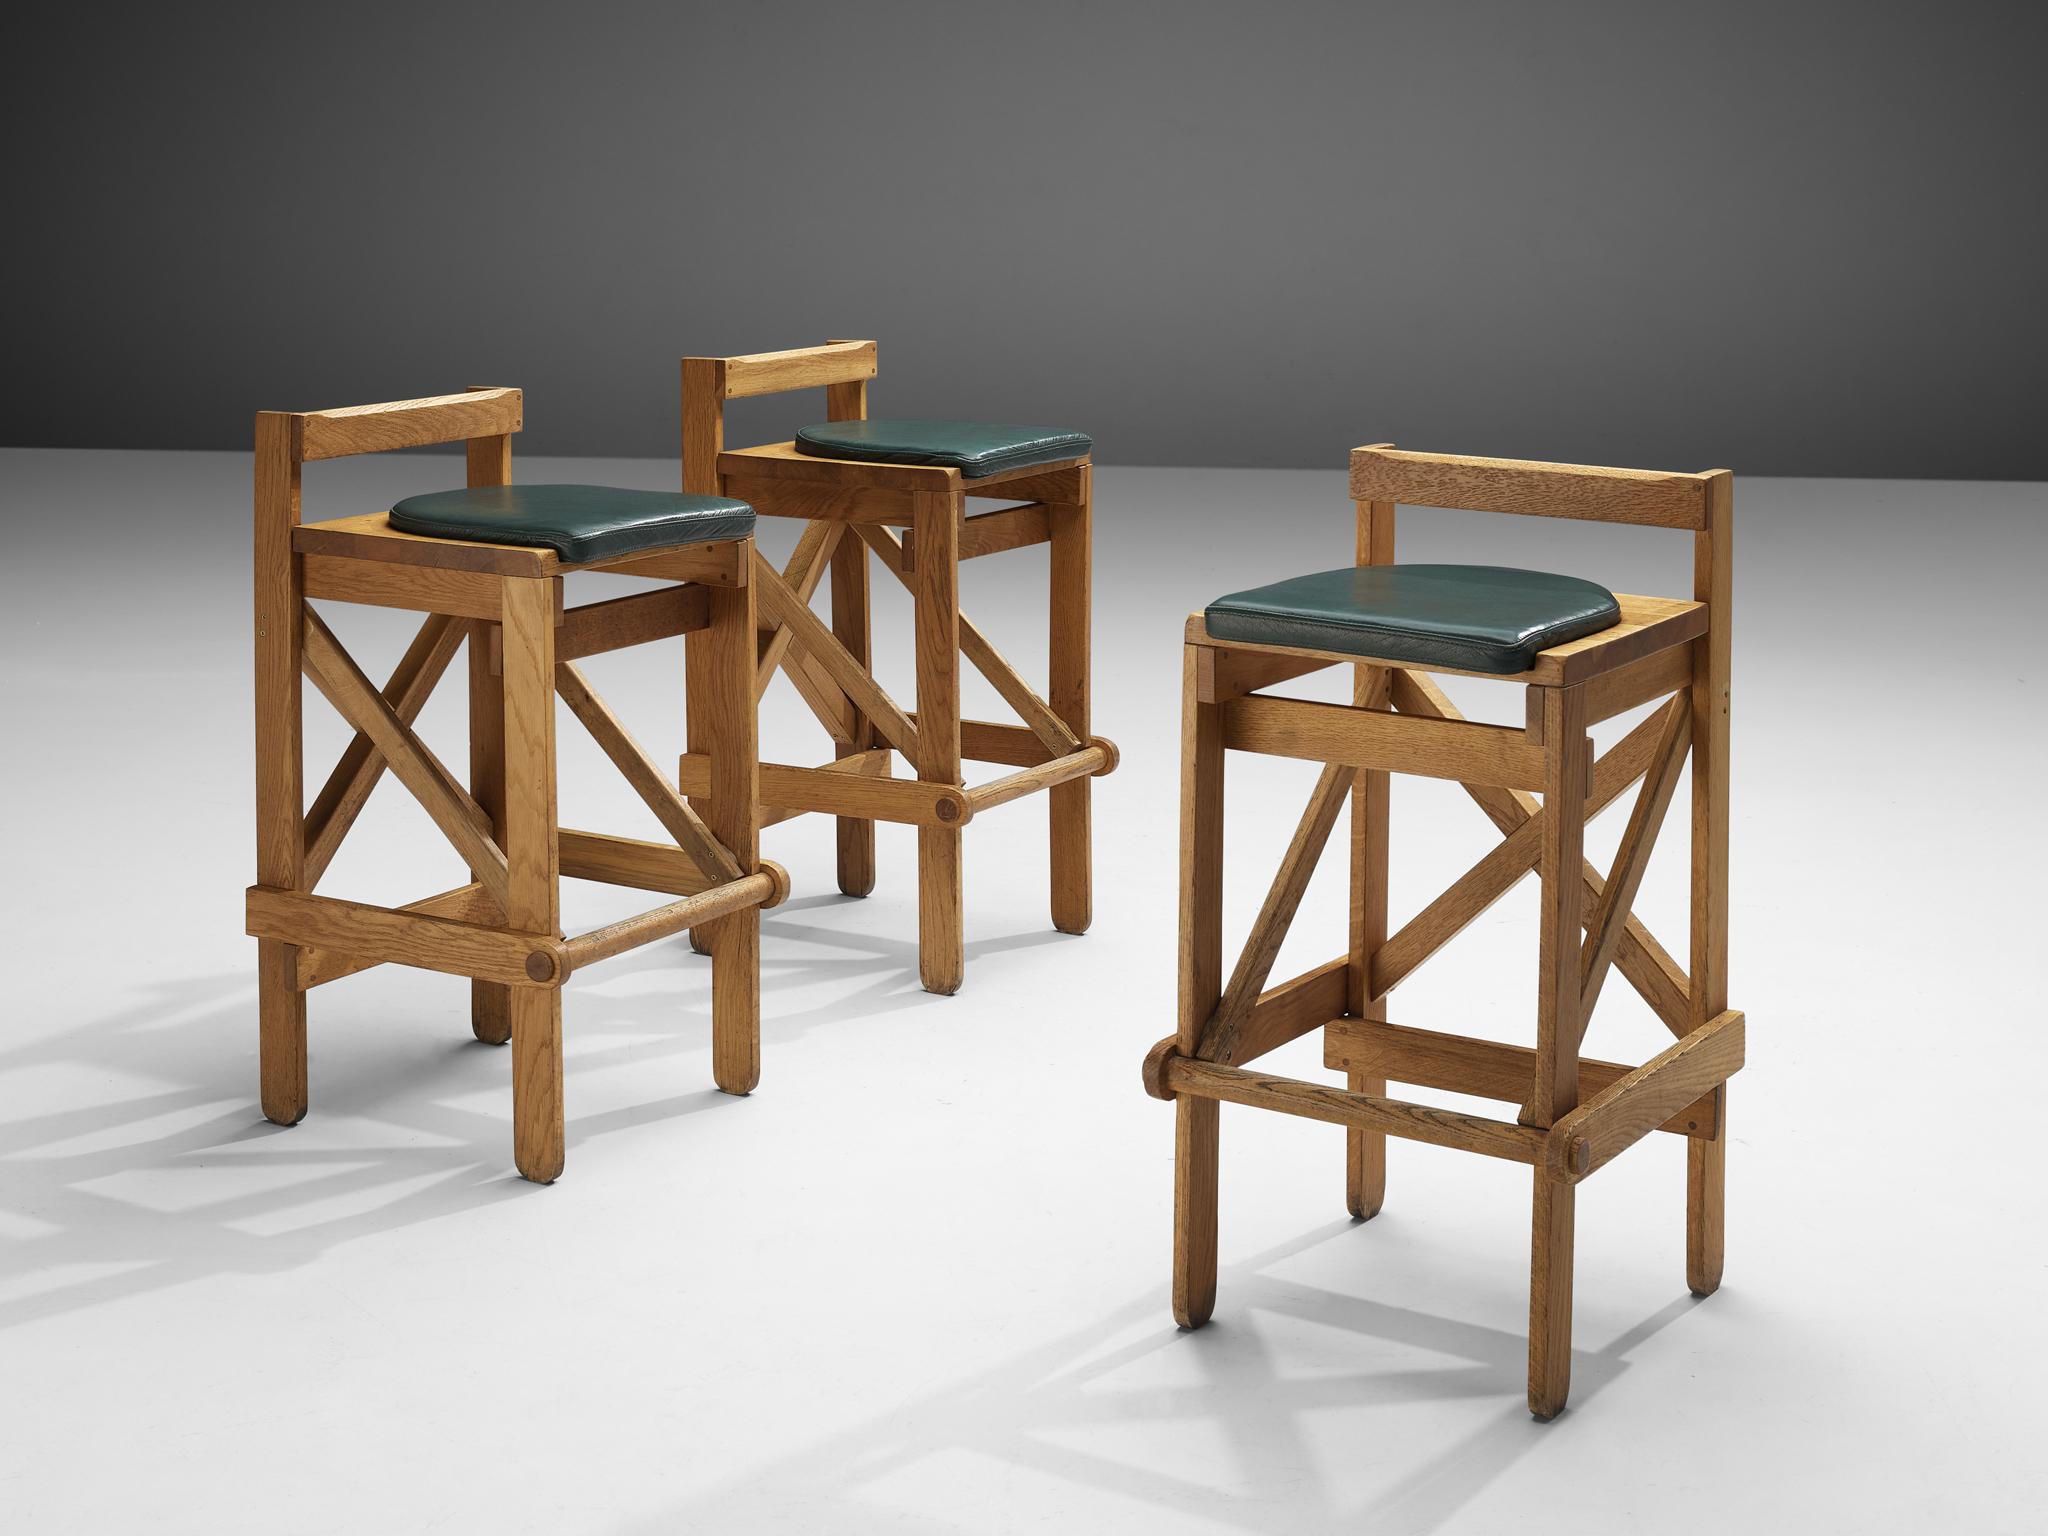 Bar stools, oak, France, 1960s

Sculptural yet natural bar stools in oak. These stools have a very elegant and complete design. Although the appearance is simplistic, all elements of a proper barstool are present. The frame with four legs shows